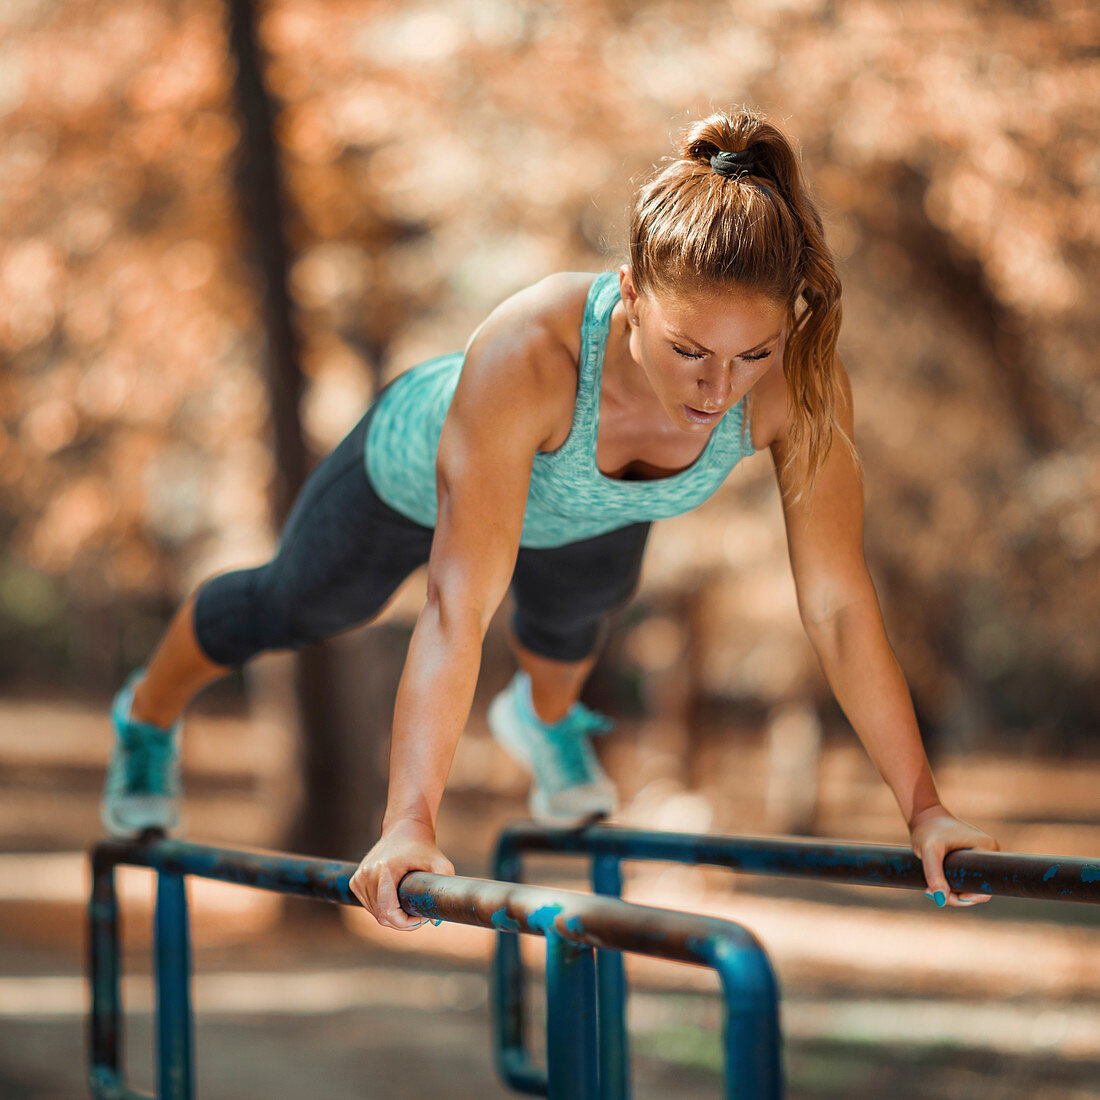 Woman exercising on parallel bars outdoors